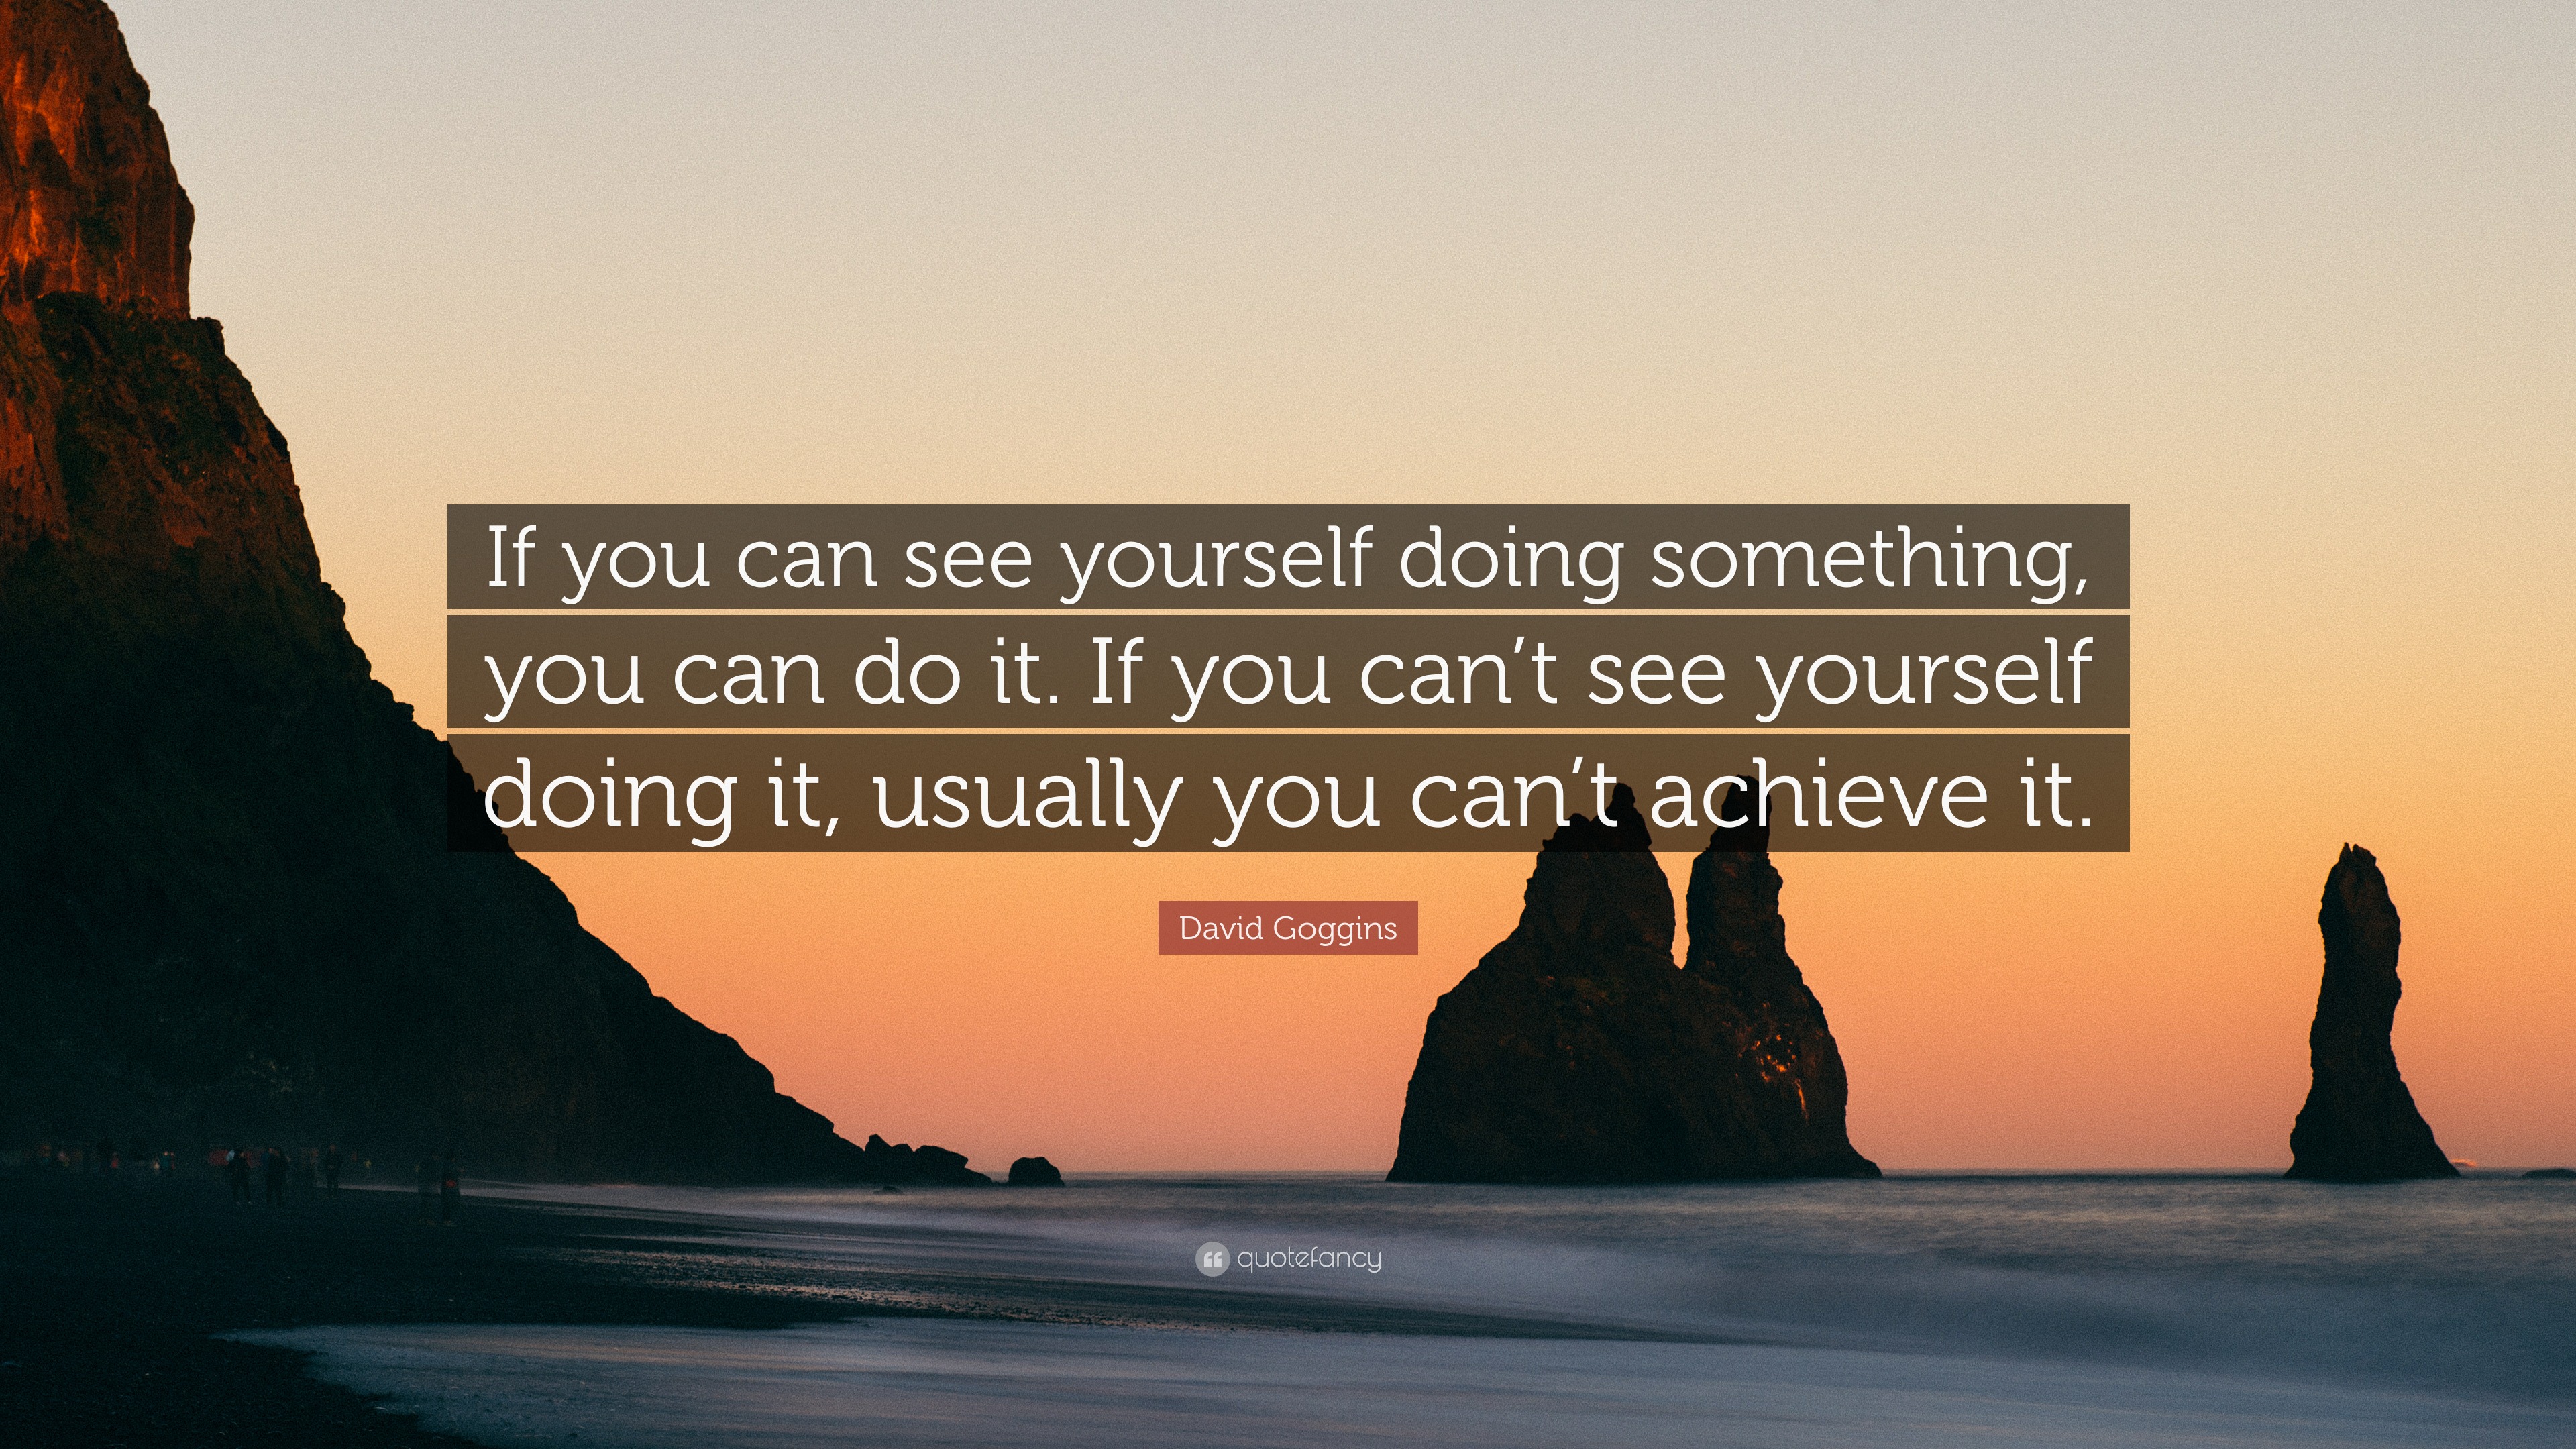 David Goggins Quote: “If you can see yourself doing something, you can do  it. If you can't see yourself doing it, usually you can't achieve it...”